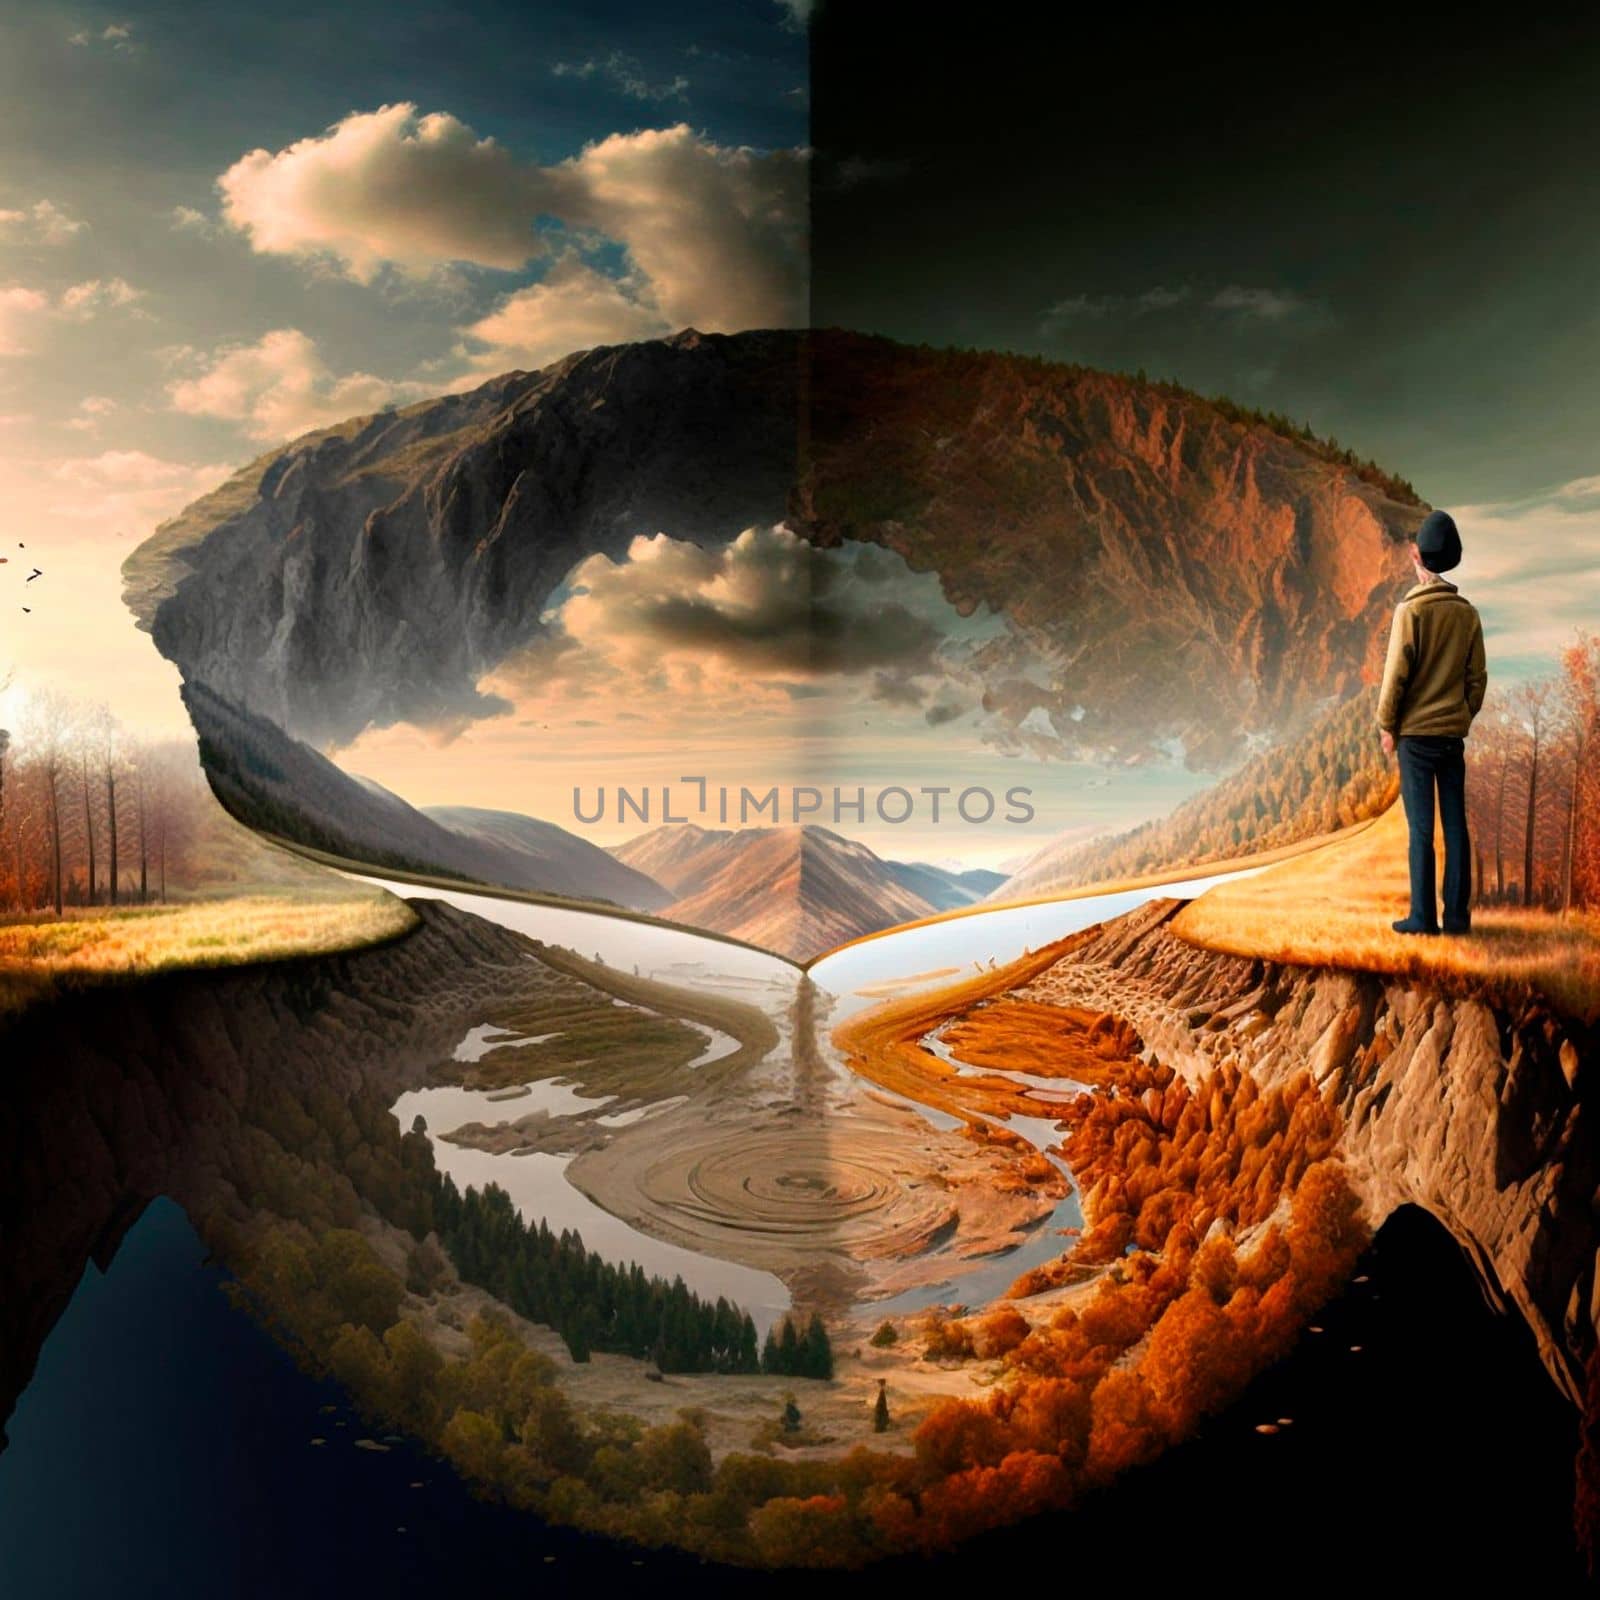 Duality of two worlds, between two worlds by NeuroSky